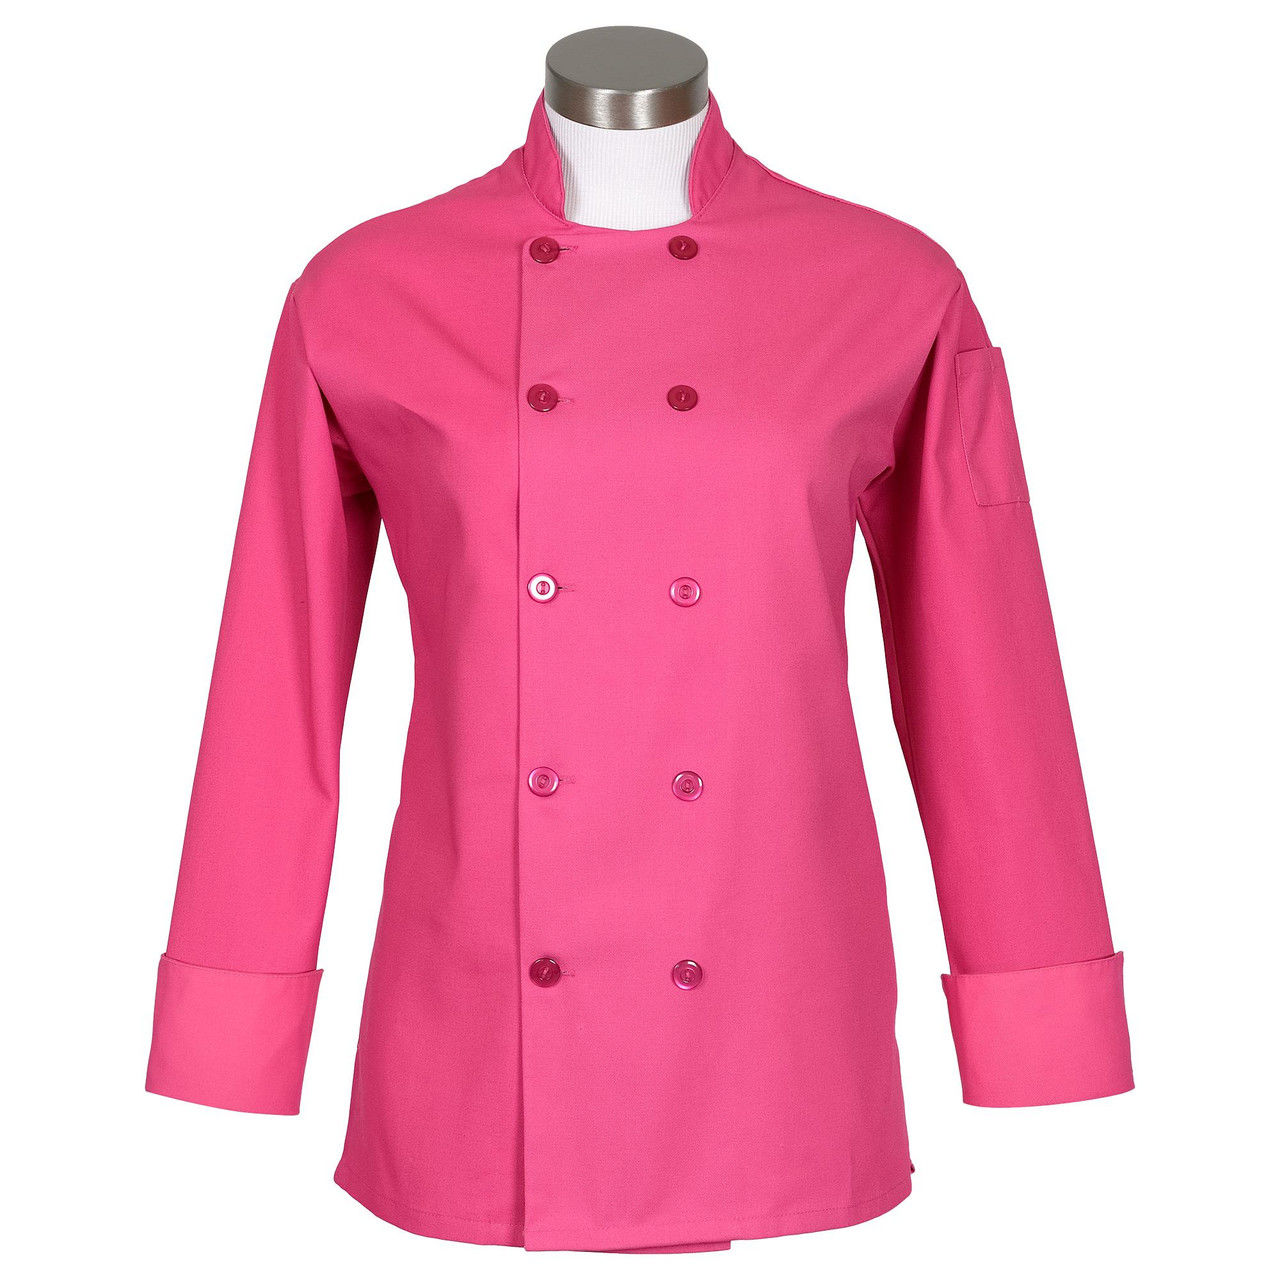 What color is the chef coats womens in long sleeves?